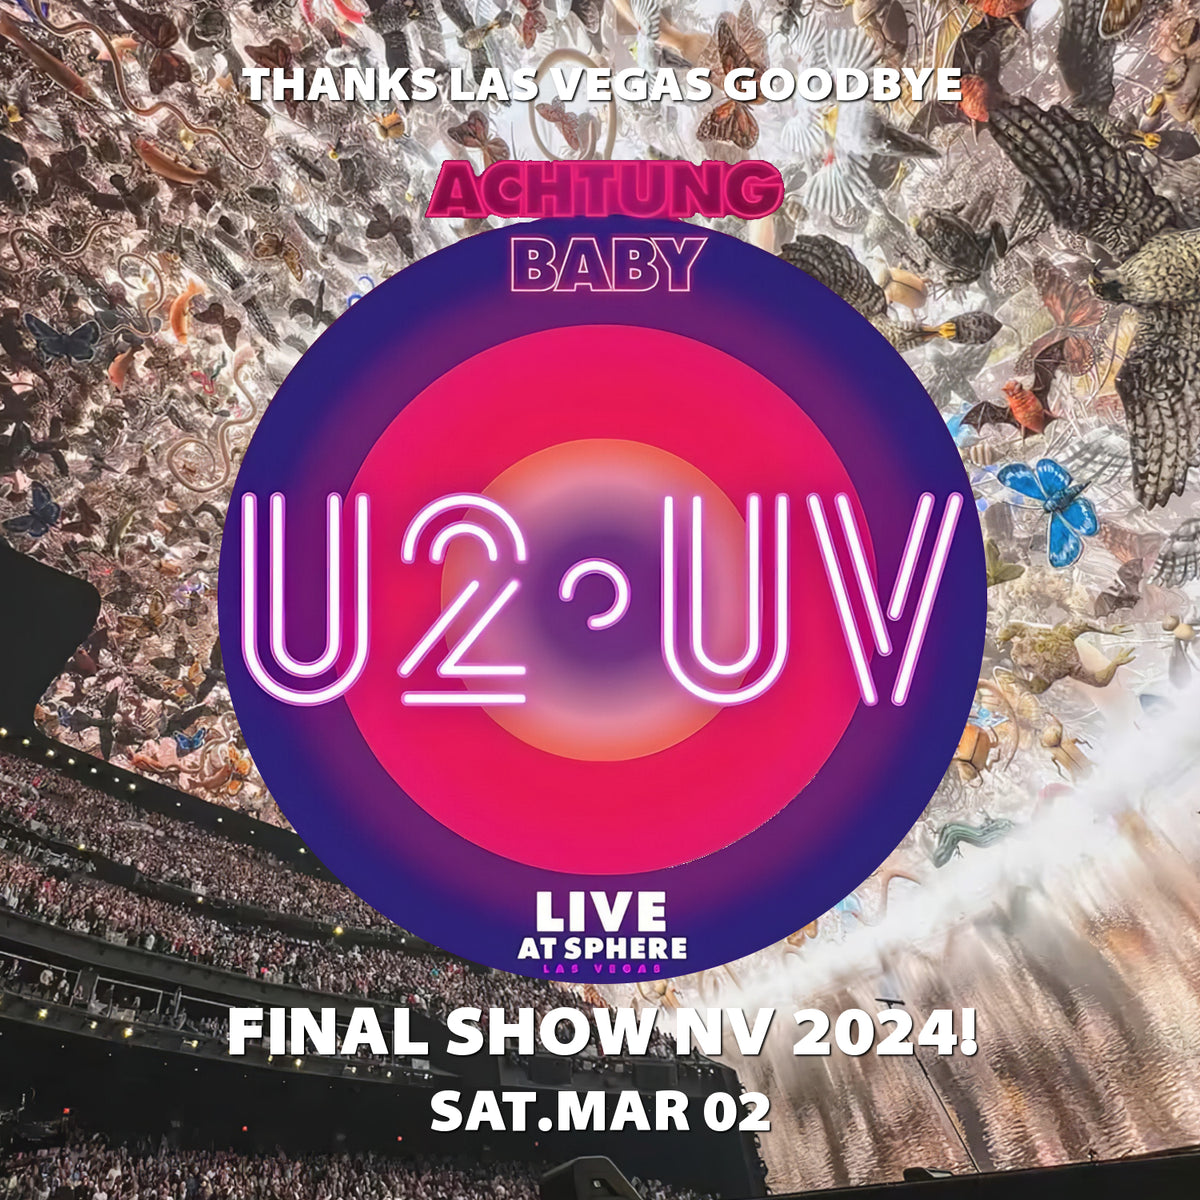 U2 / UV Achtung Baby Live at Sphere Tour 2024 Final Show NY 